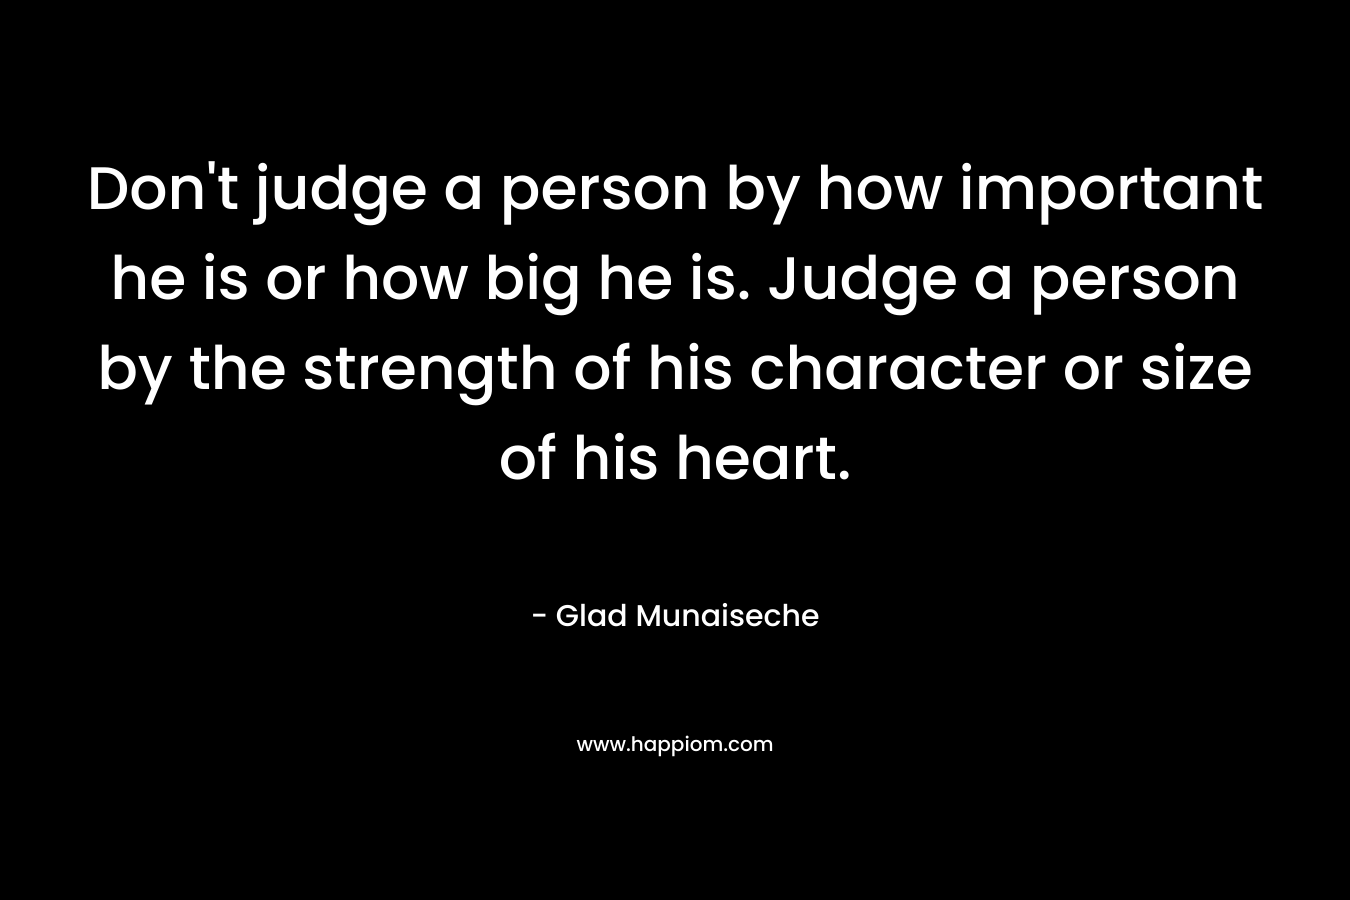 Don't judge a person by how important he is or how big he is. Judge a person by the strength of his character or size of his heart.